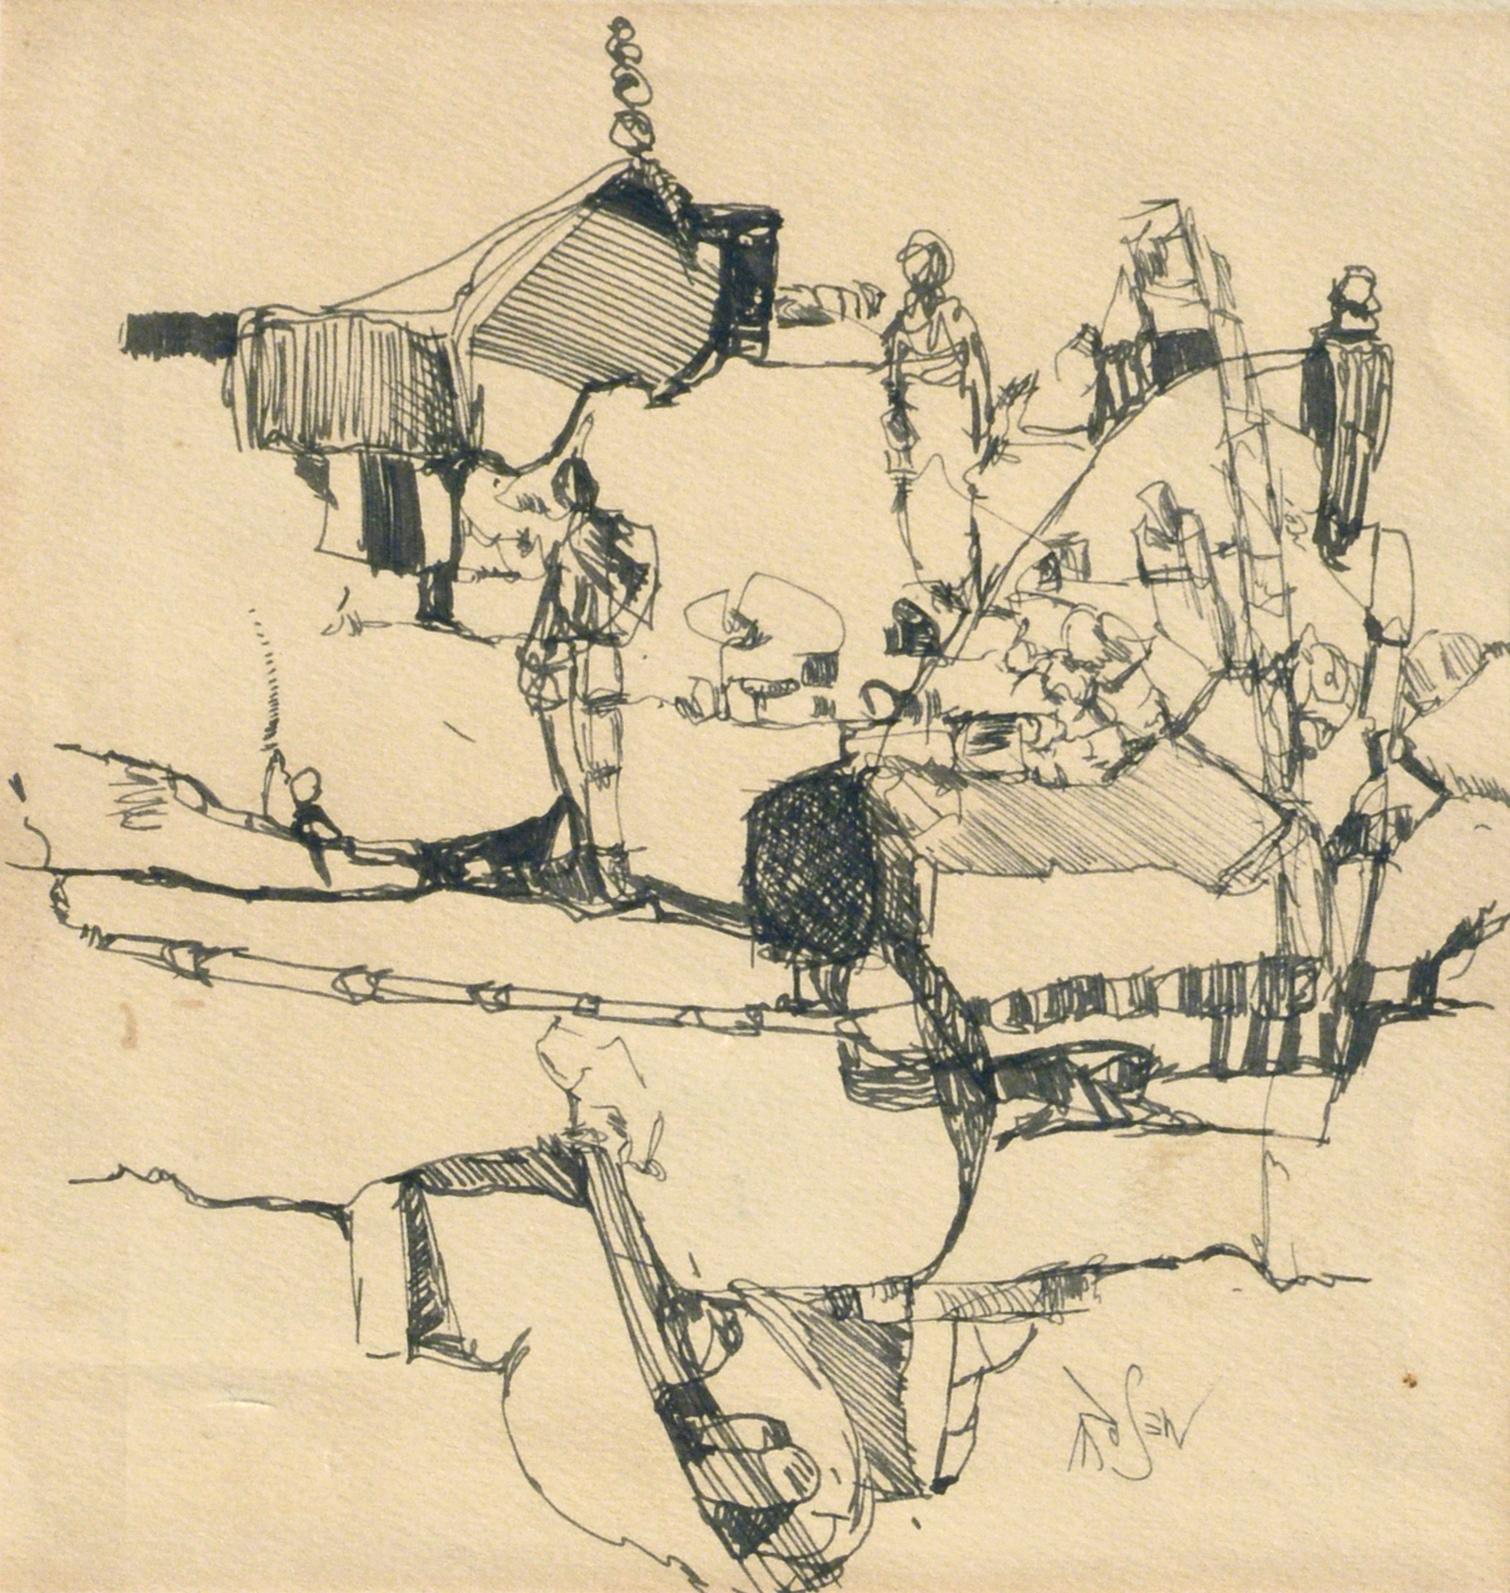 Abstract Figures and Landscape, Surreal Line Drawing Composition - Art by David Rosen (b.1912)